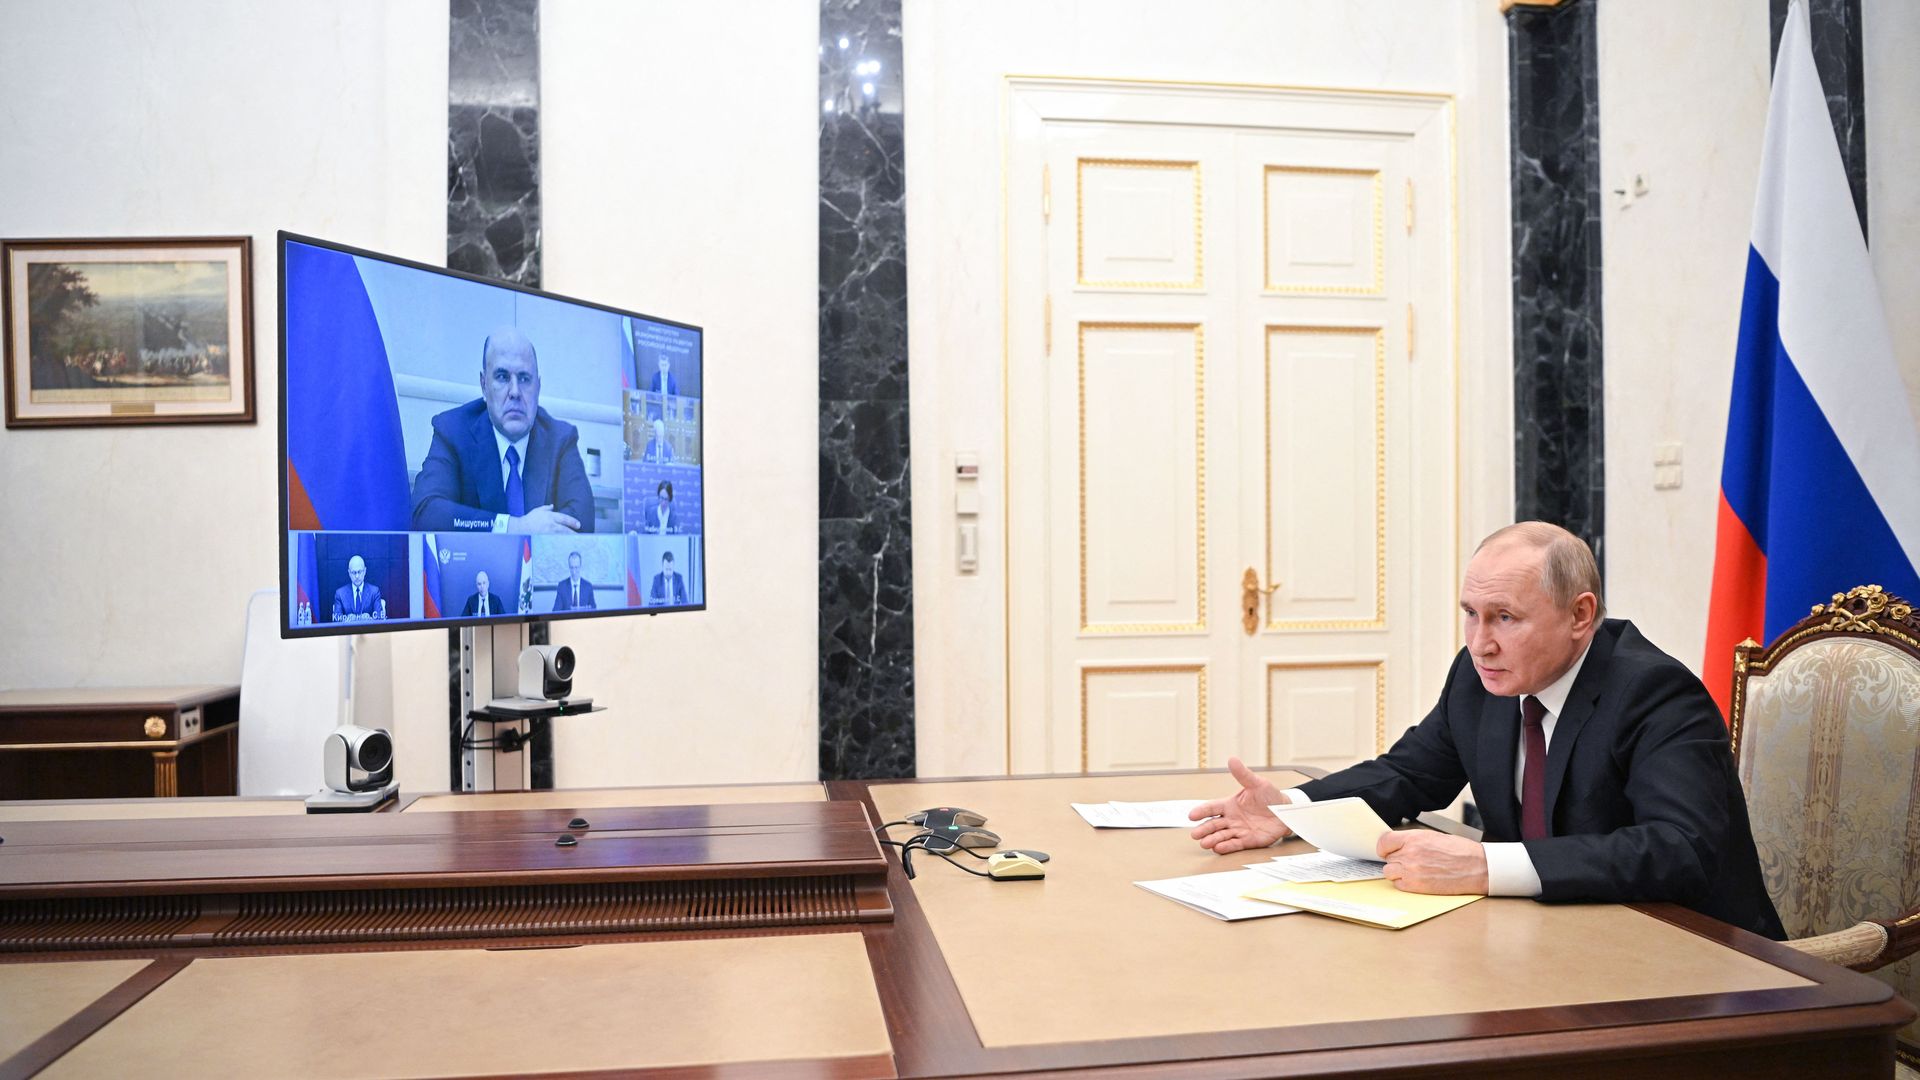 Russia's President Vladimir Putin during a meeting in Moscow on Feb. 17.